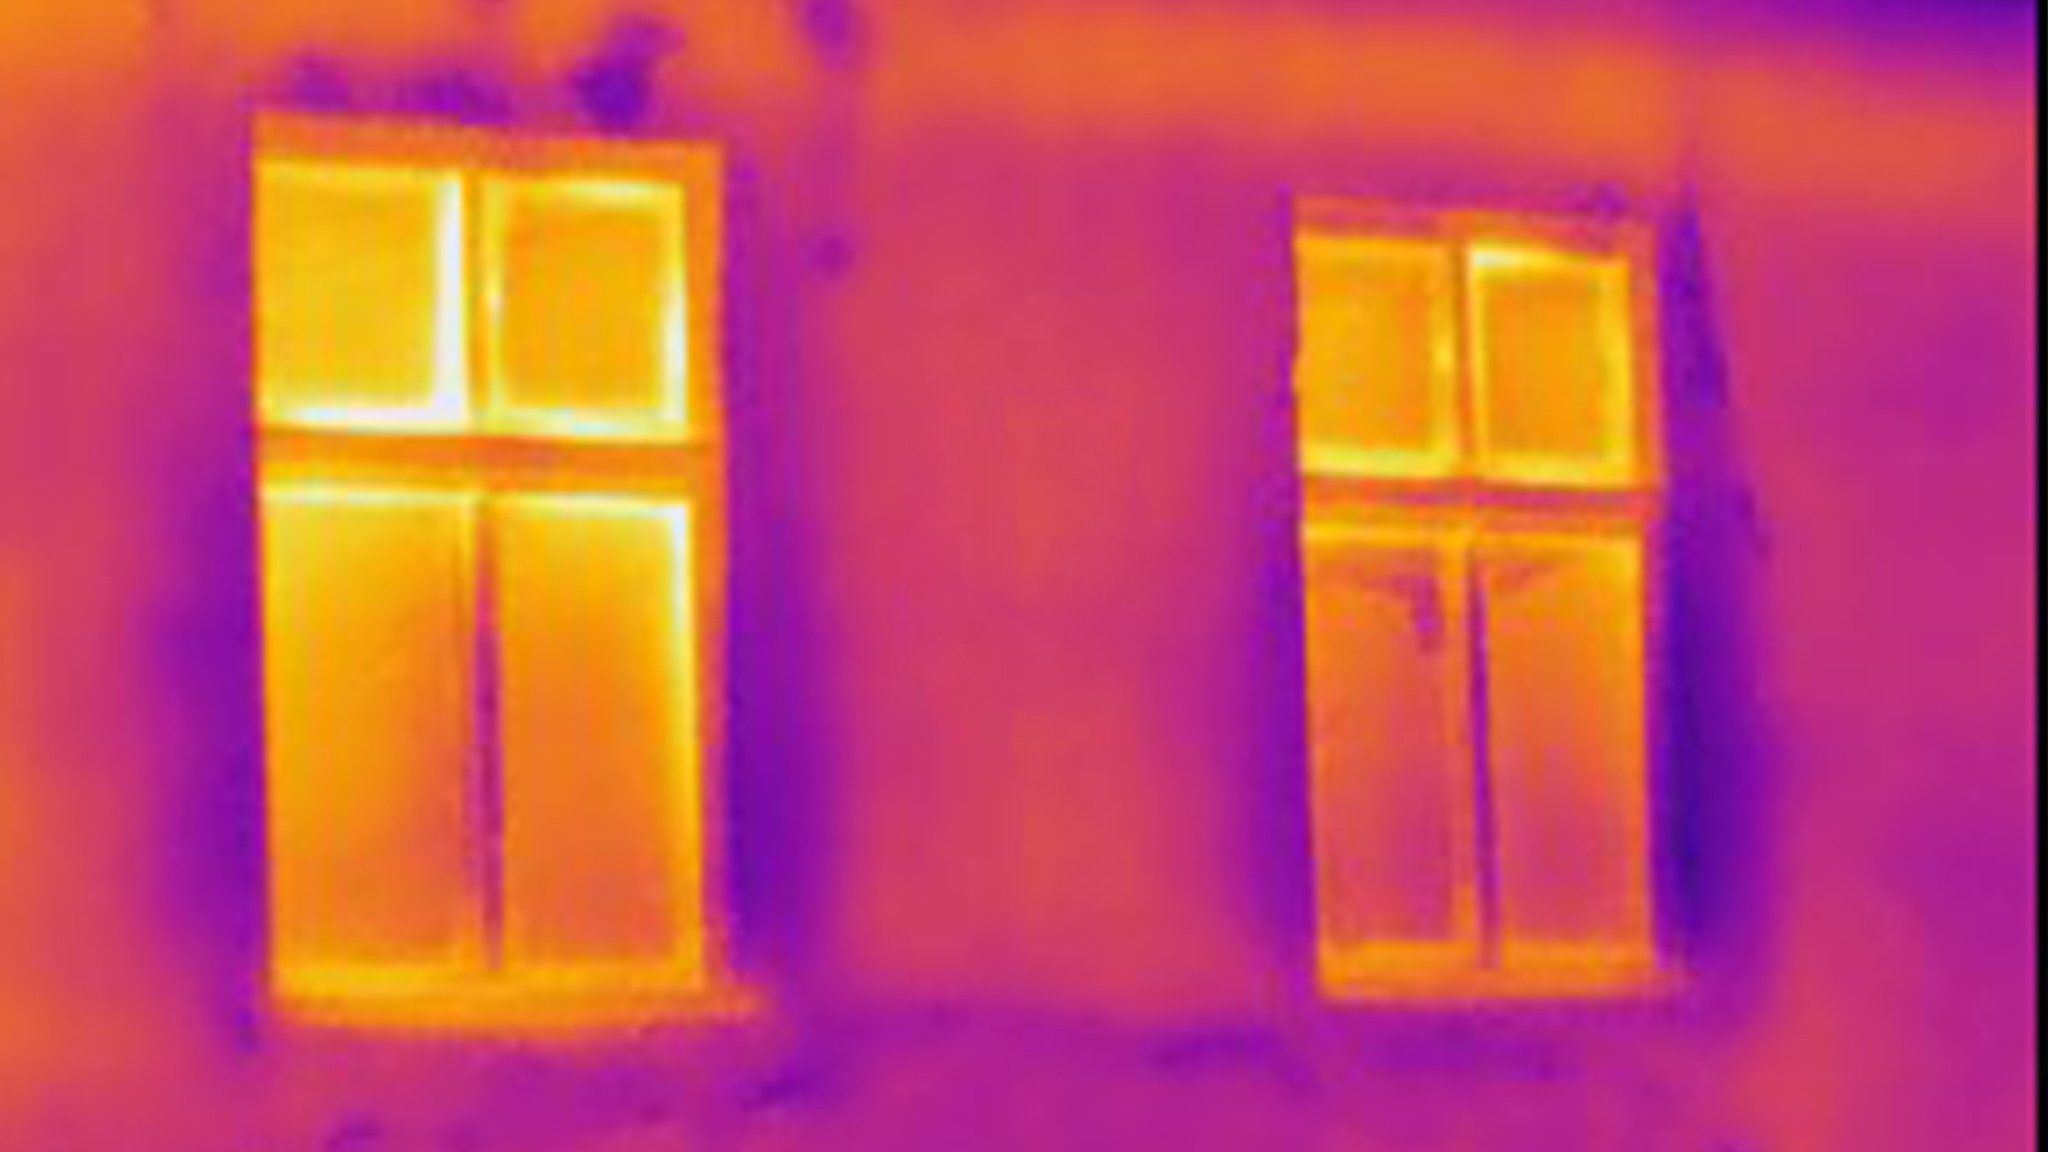 A picture of two windows as seen through a thermal imaging camera